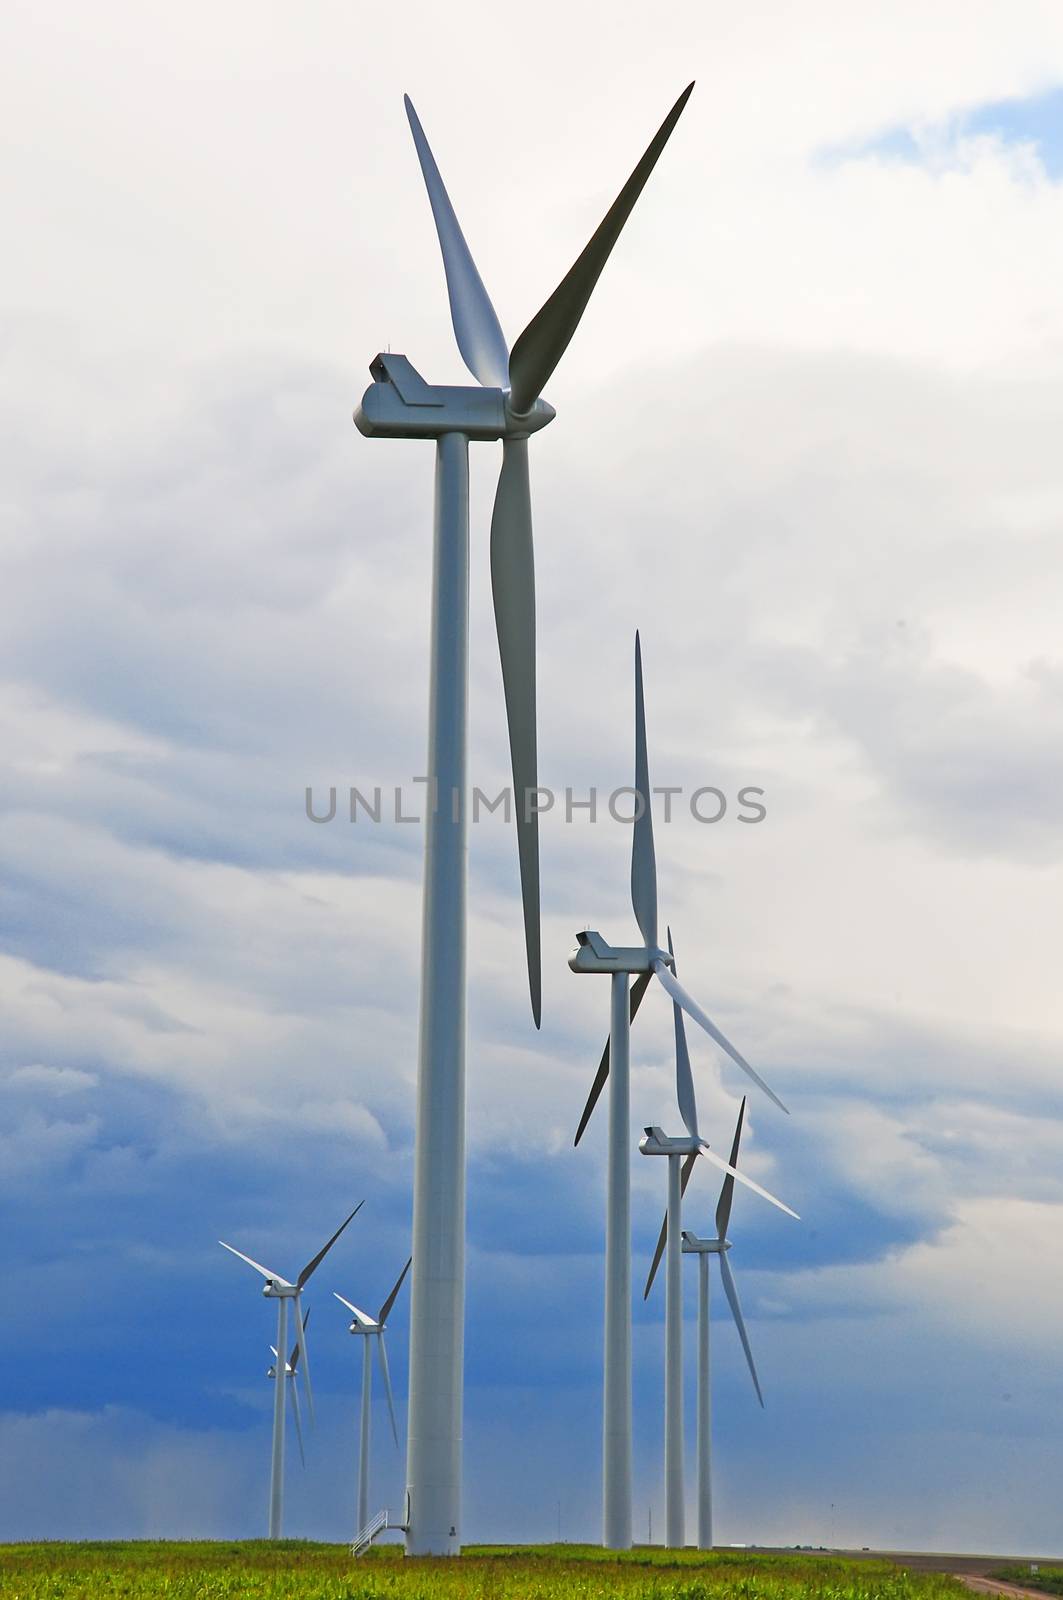 Wind turbines against a cloudy sky await a breath of wind to start thier turbines.